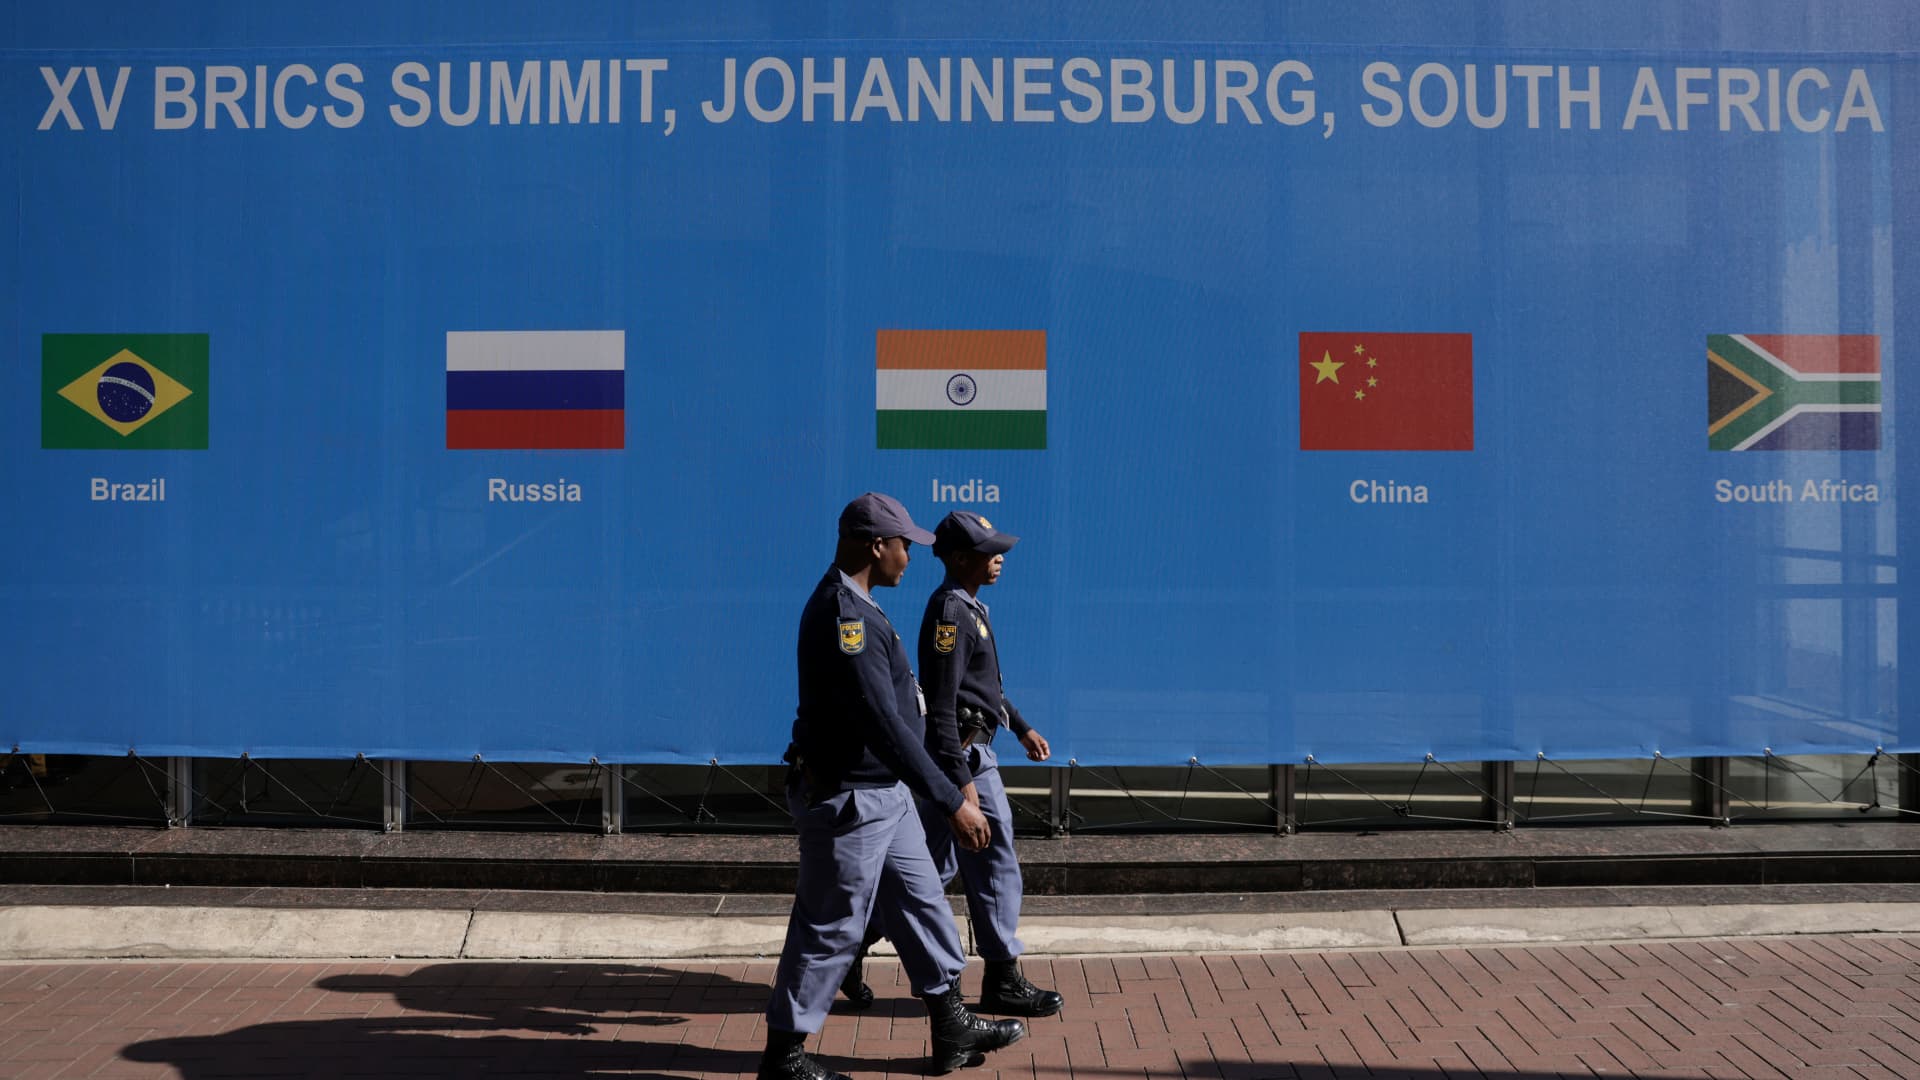 Russia, expansion and Western relations in the spotlight as leaders gather for pivotal BRICS summit